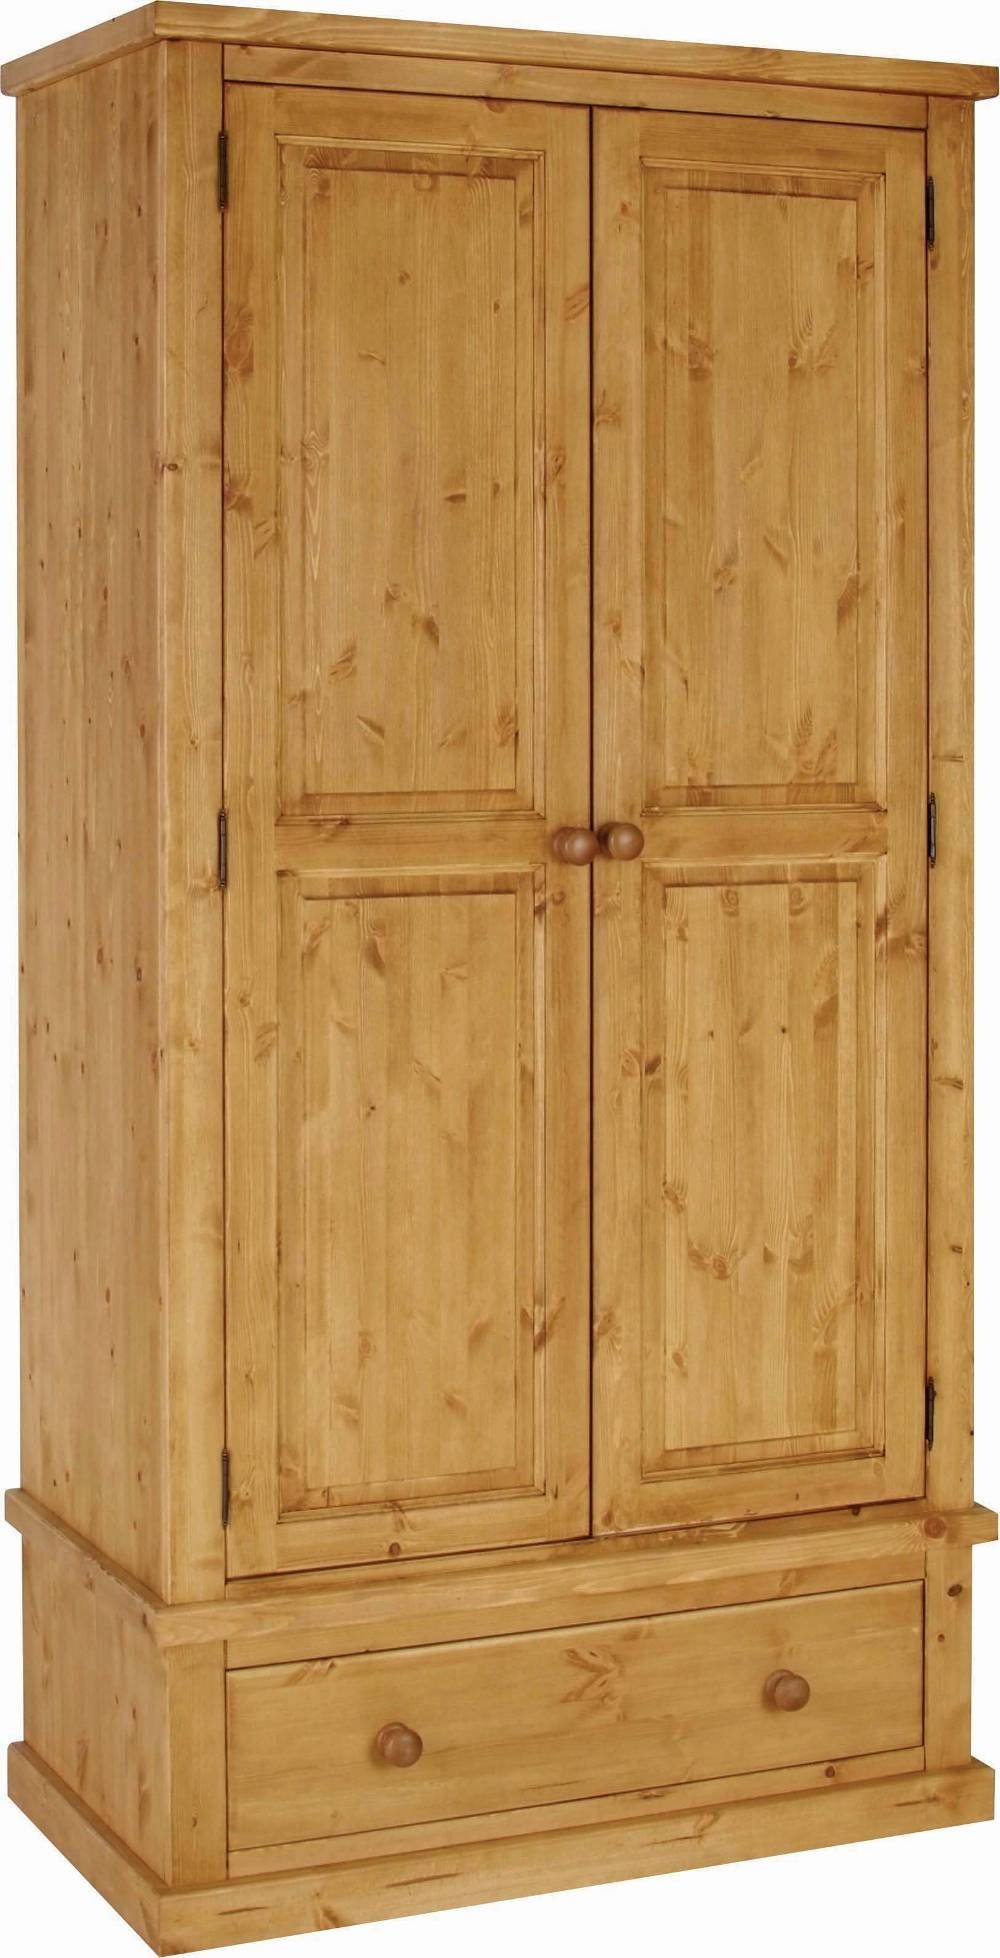 Chunky Pine Large Double Ladies Wardrobe With Drawers | Furniture Throughout Double Pine Wardrobes (View 5 of 15)